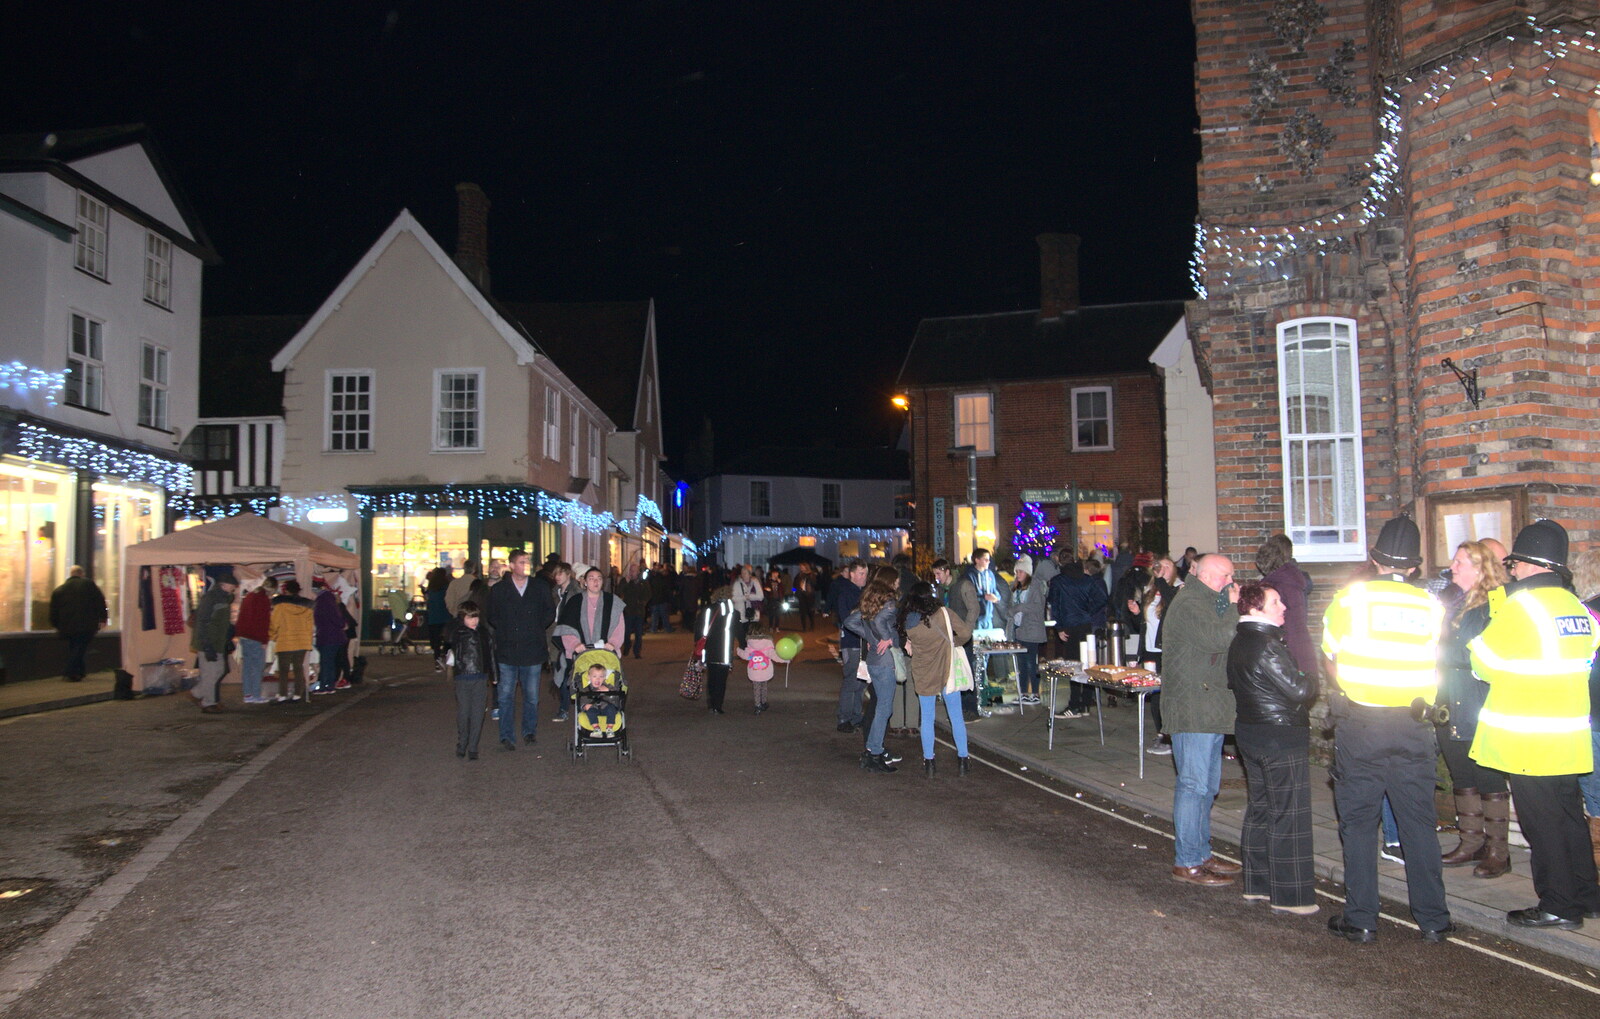 Broad Street in Eye from A Pub Crawl and Christmas Lights, Thornham, Cotton, Bacton and Eye, Suffolk - 7th December 2018